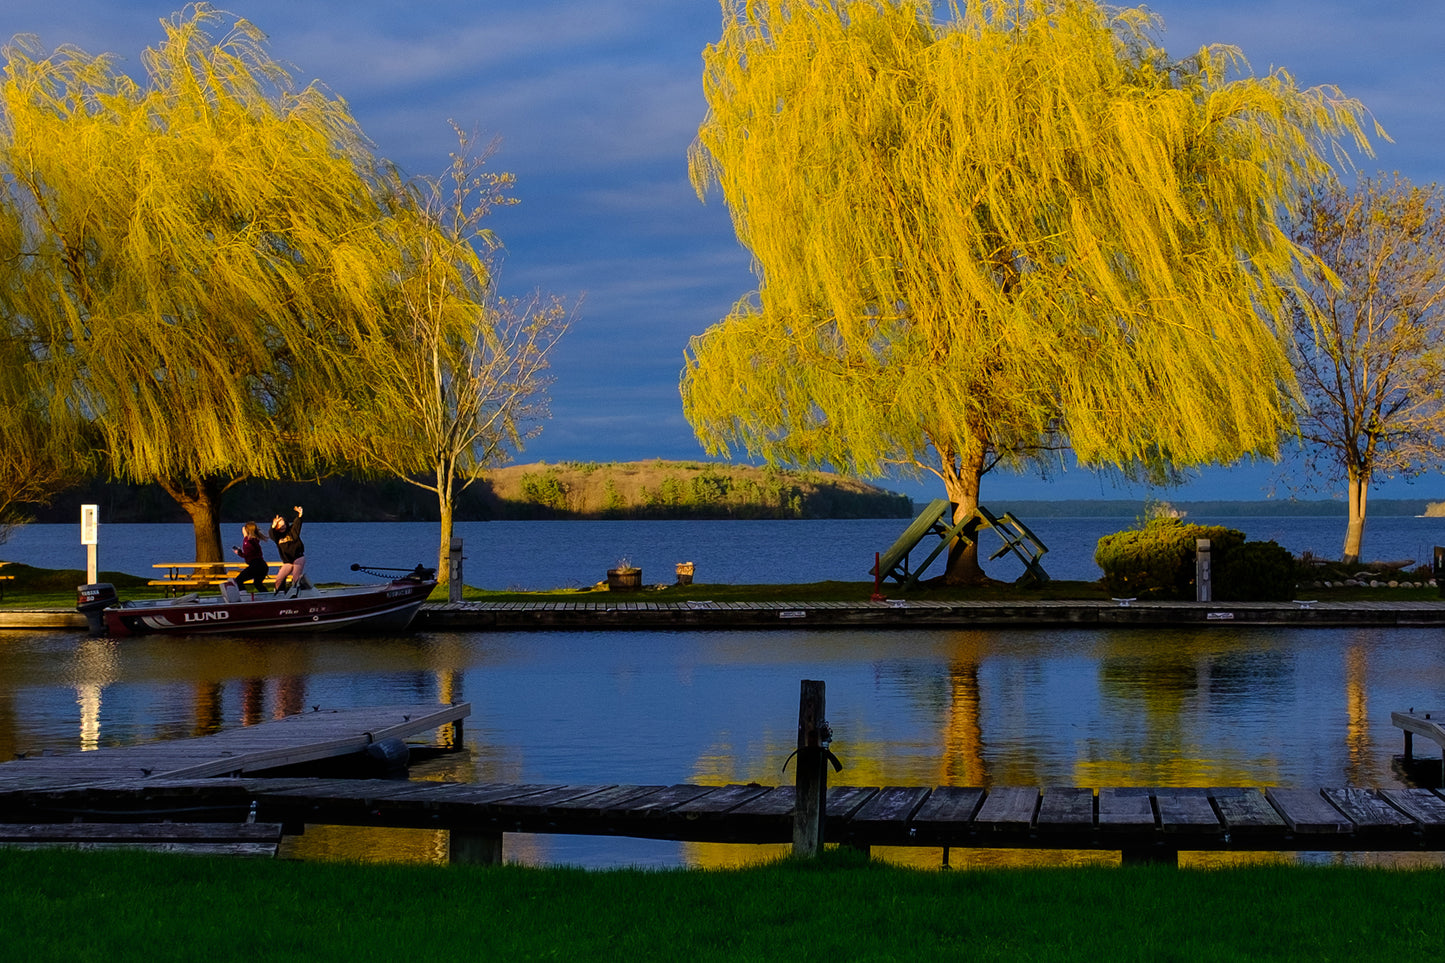 Photographic Print: "Golden Willows"